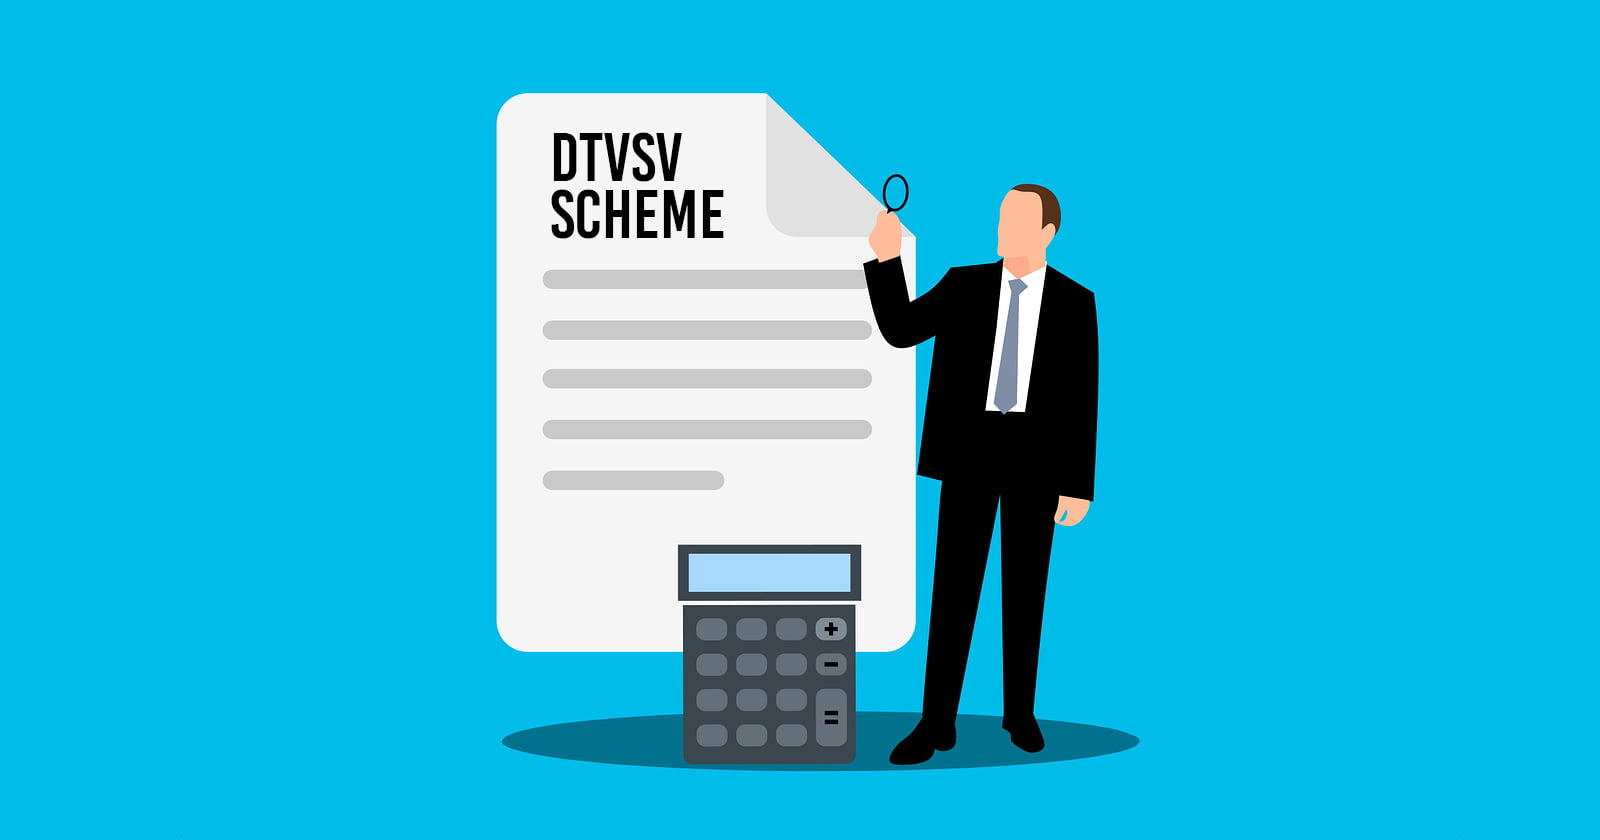 Income - Tax - Matters - settled - DTVSV - scheme - ITAT - TAXSCAN